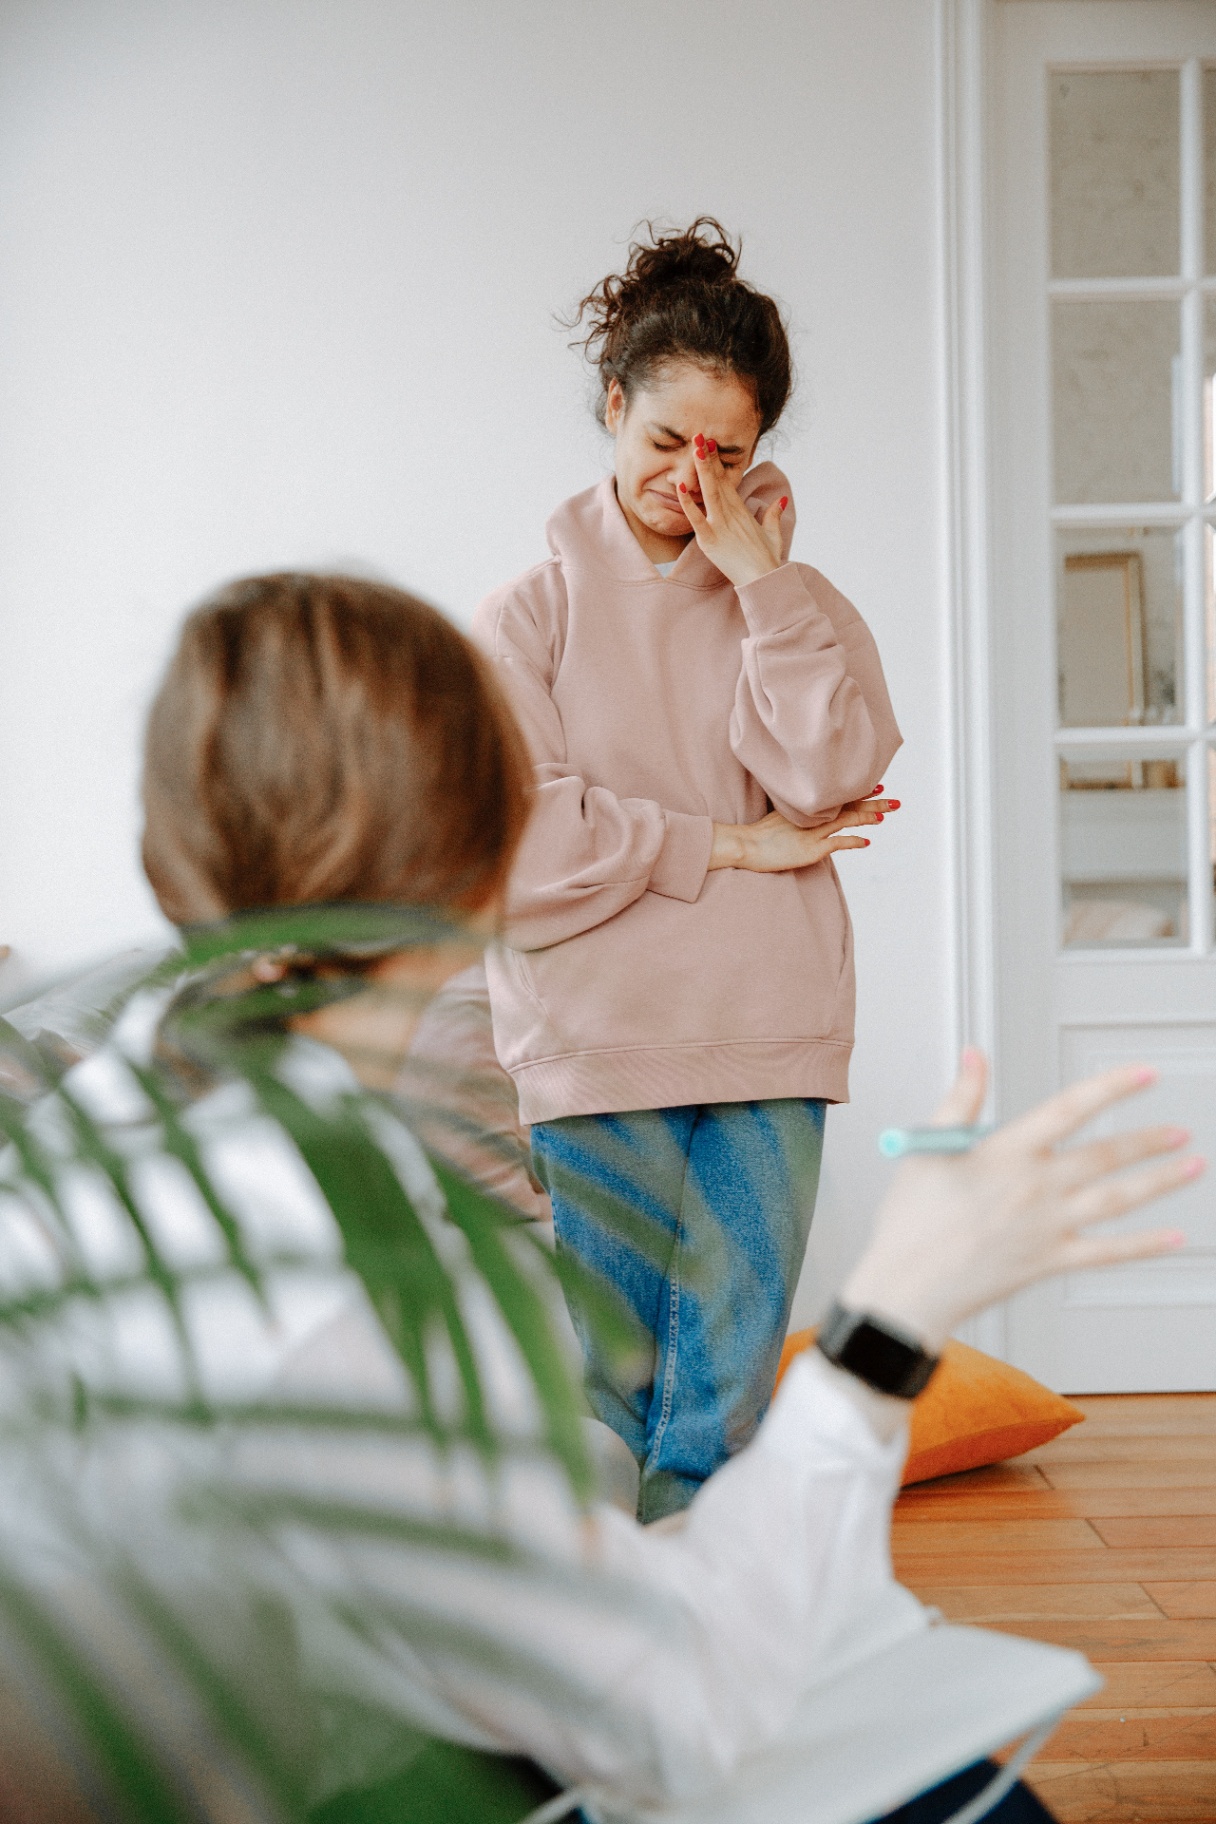 Image of a crying woman standing while another woman speaks to her. Anxiety symptoms can be difficult to overcome on your own. With the help of an experienced anxiety therapist you can begin working to manage them in a healthy way with anxiety therapy in Saint Petersburg, FL.